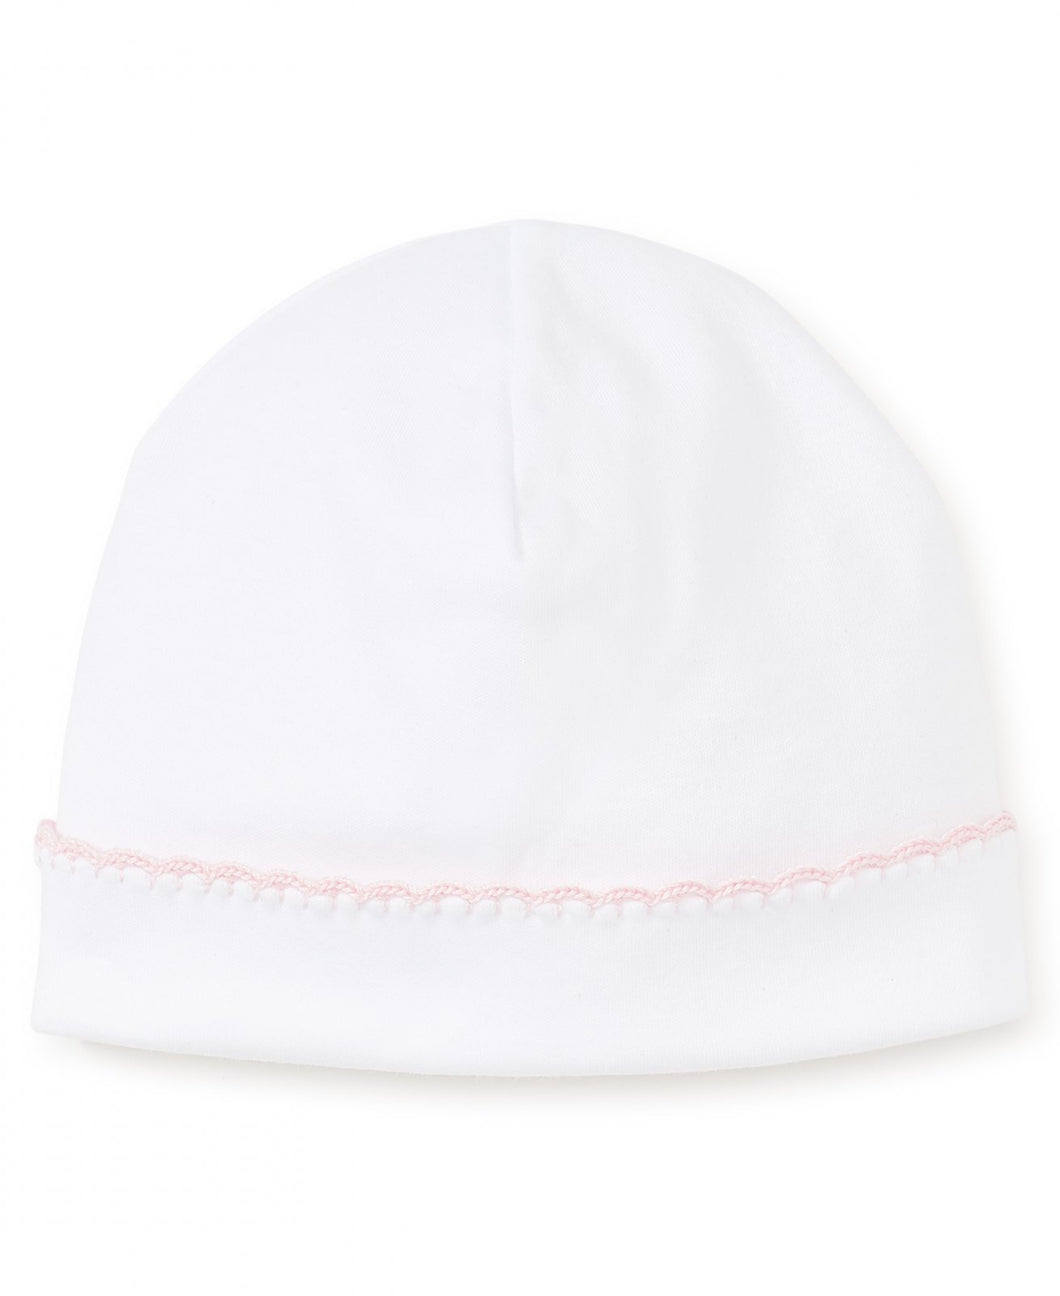 New Premier Basics Hat - White With Pink